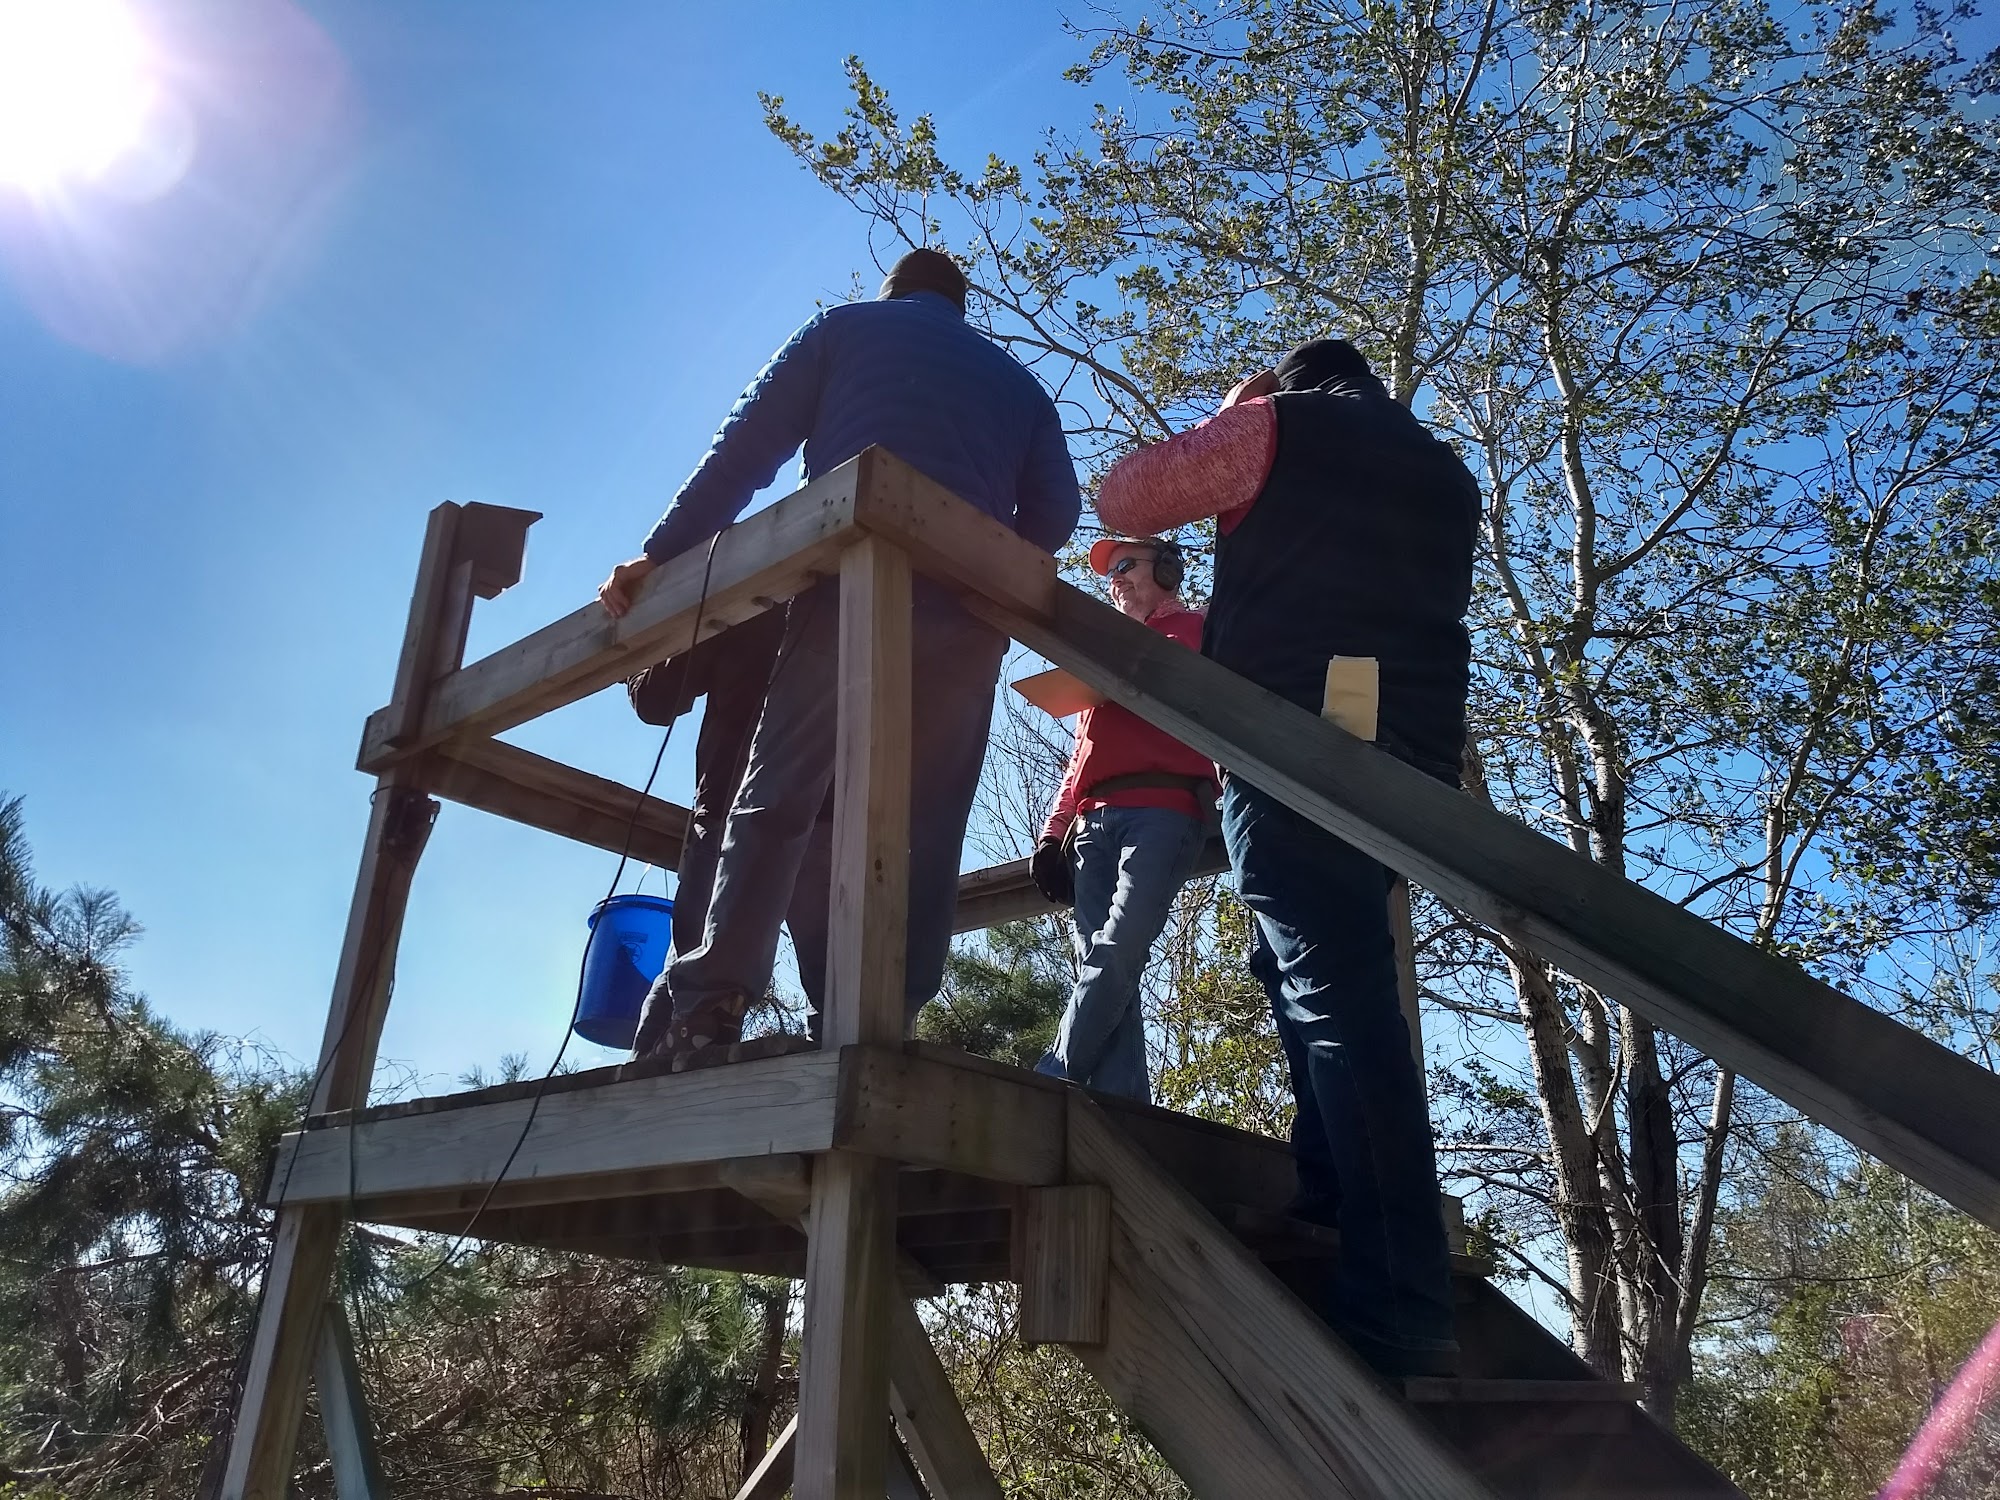 Blendon Pines Sporting Clays